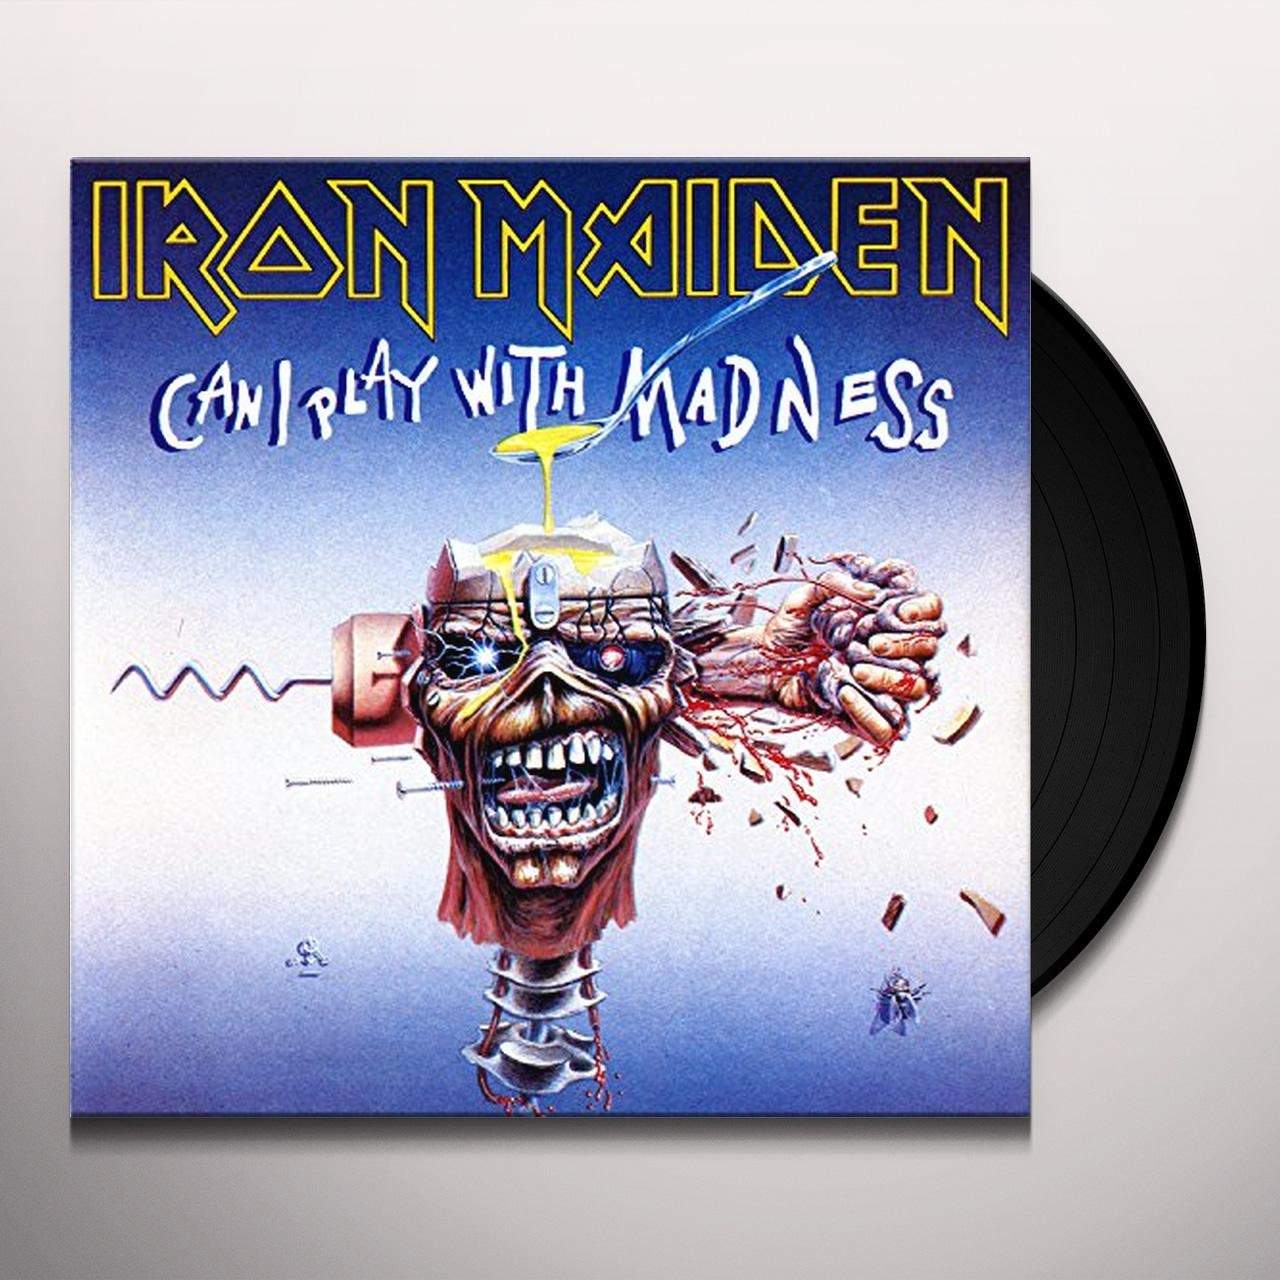 IRON MAIDEN  'CAN I PLAY WITH MADNESS' 7"